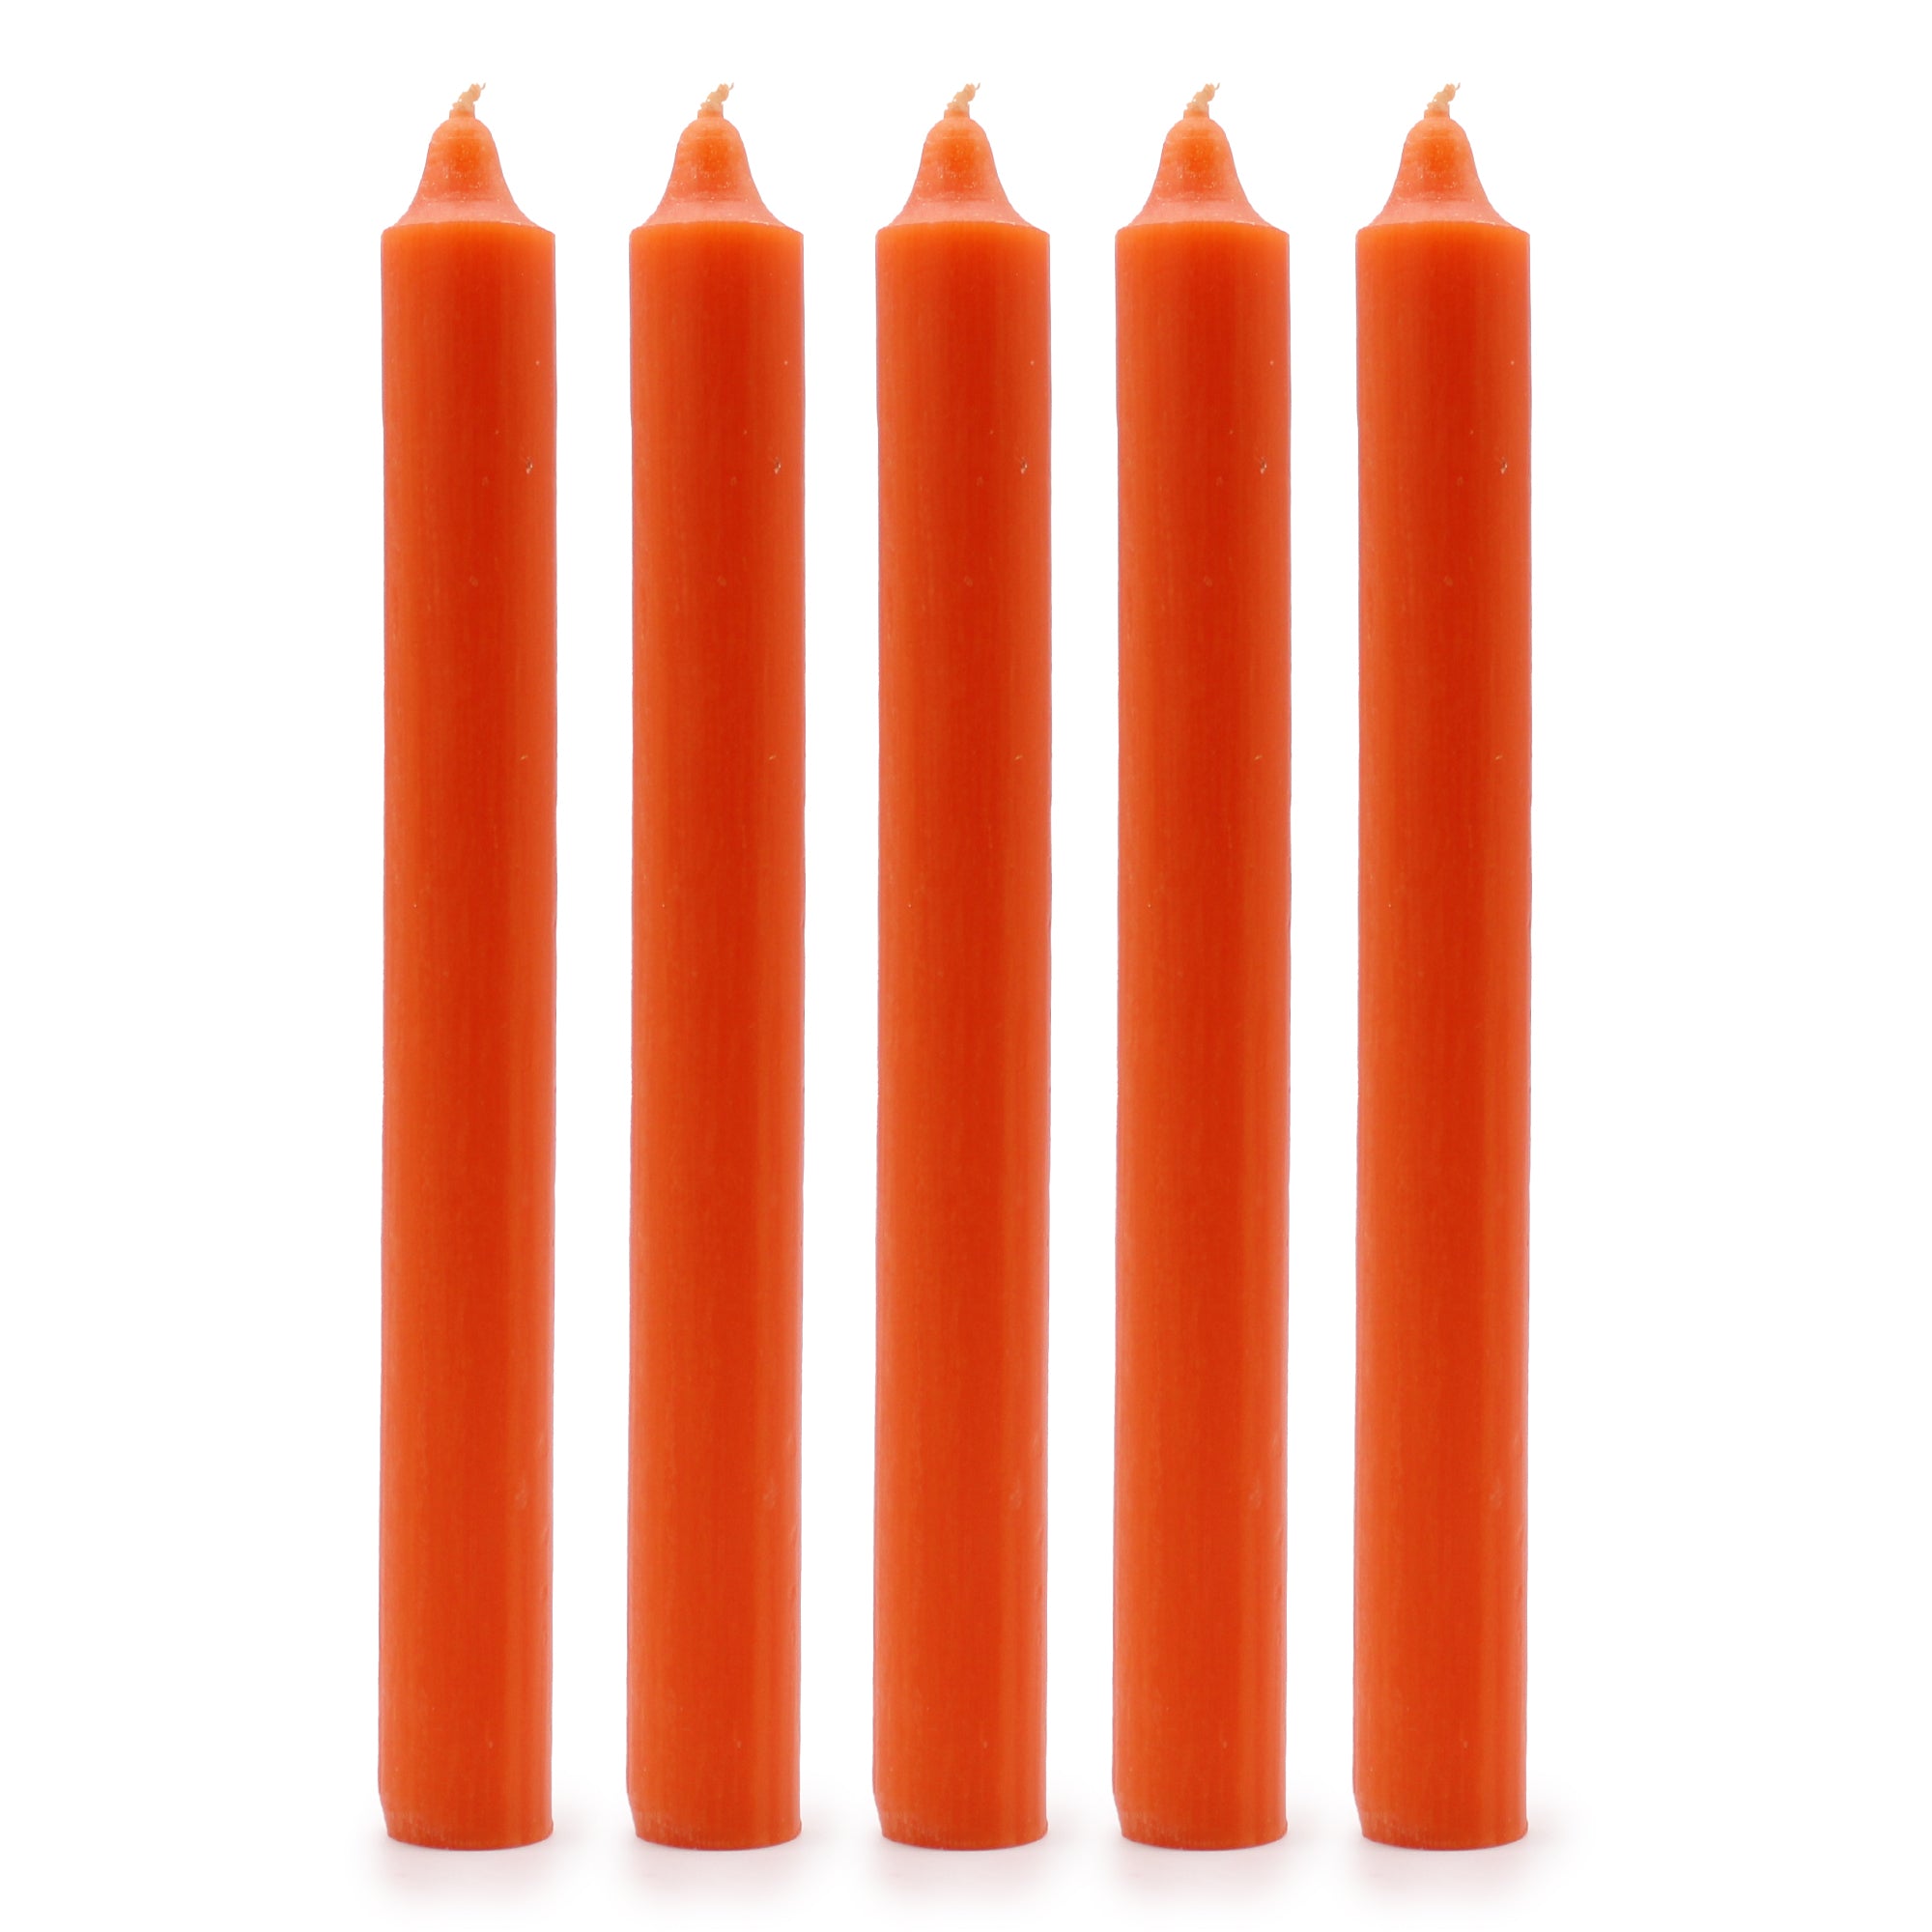 View Solid Colour Dinner Candles Rustic Orange Pack of 5 information